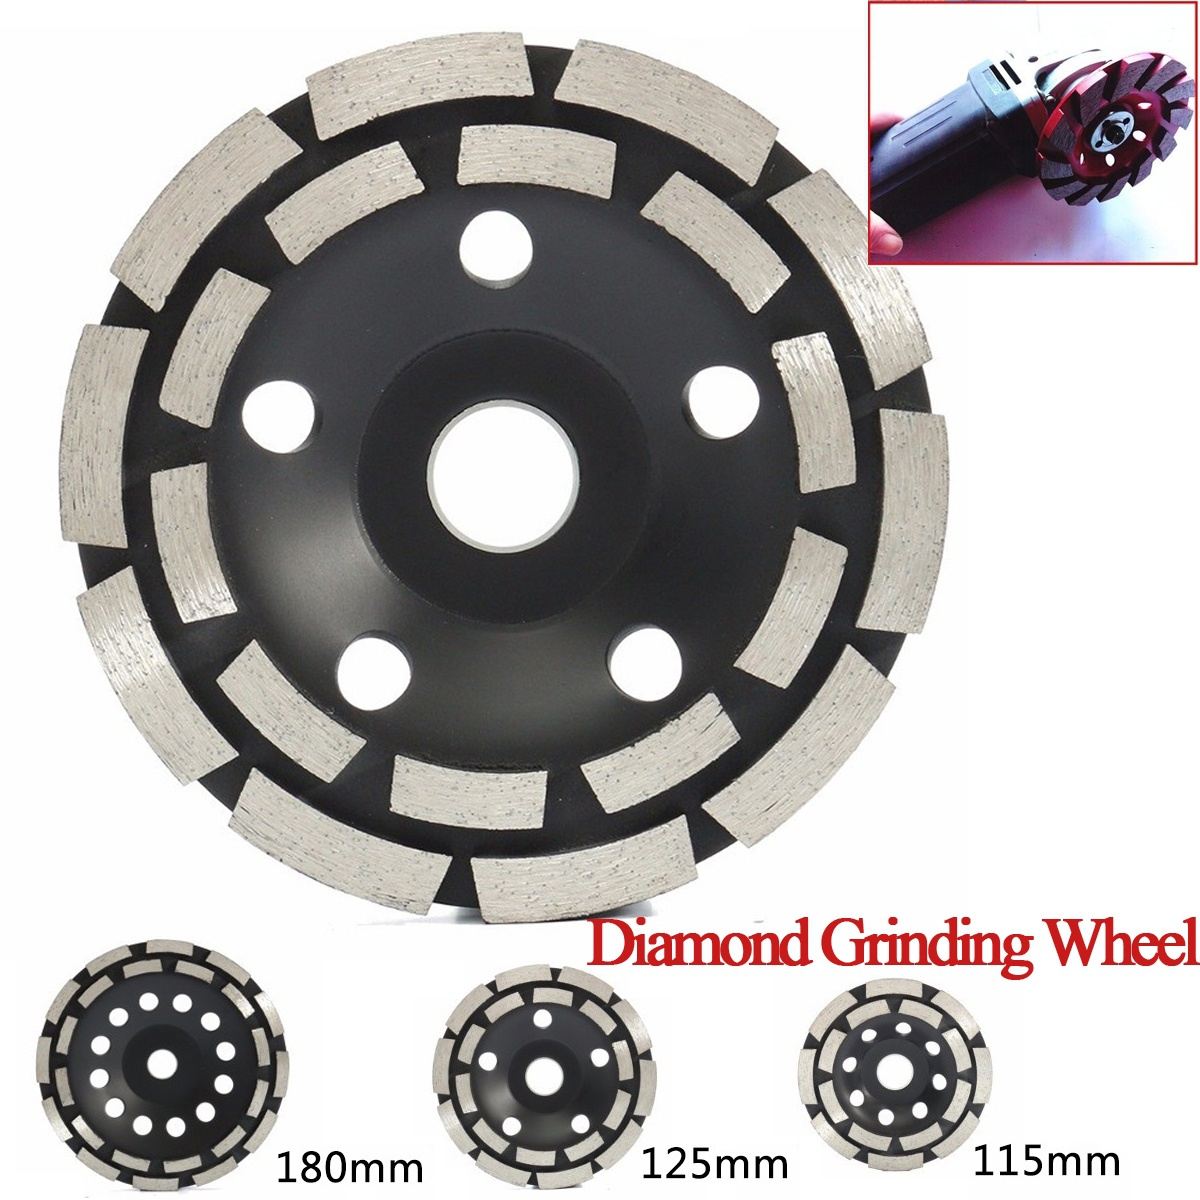 Round Wood Angle Grinding Wheel Abrasive Disc Angle Grinder Carbide Coating Bore Shaping Sanding Carving Rotary Tool